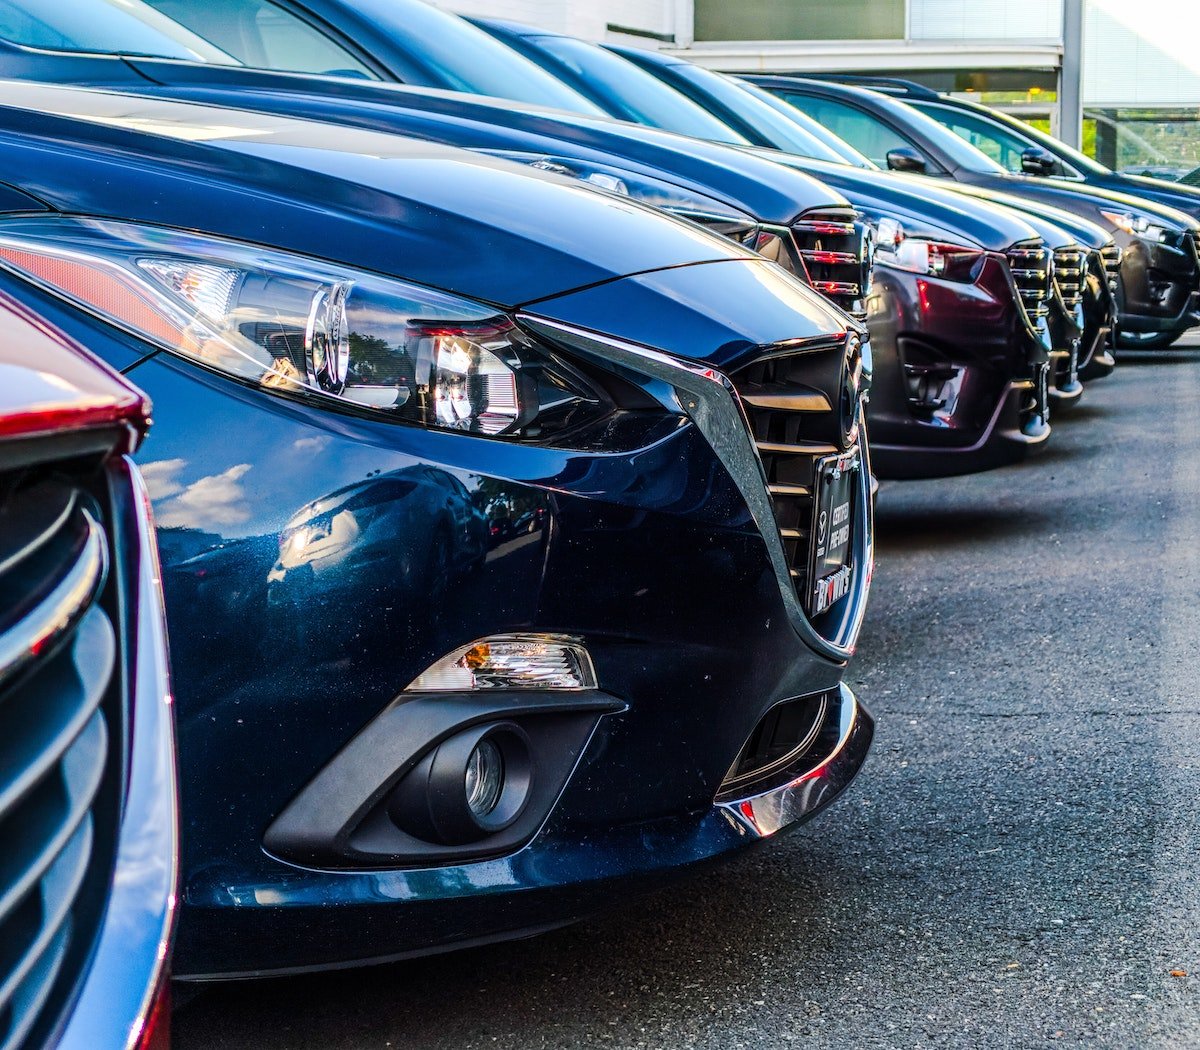 9 Best Auto Dealer Review & Rating Sites to Keep an Eye On